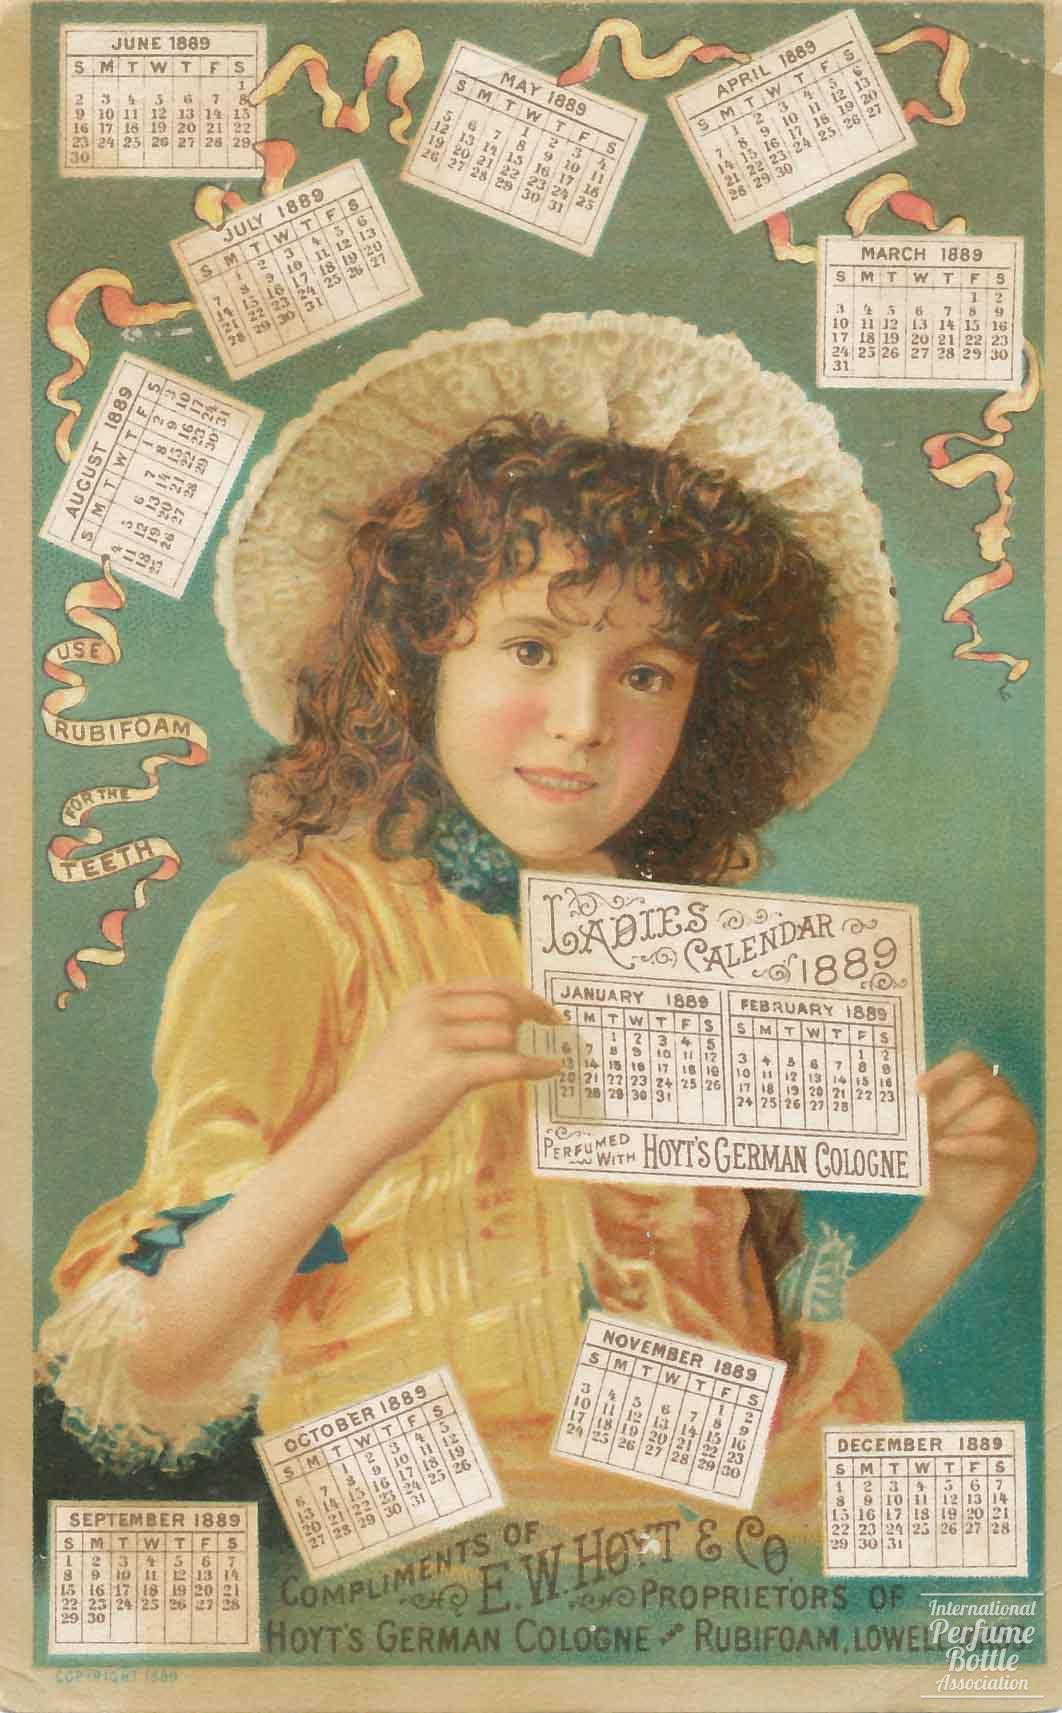 "Hoyt's German Cologne" Scent Card by E. W. Hoyt With 1889 Calendar